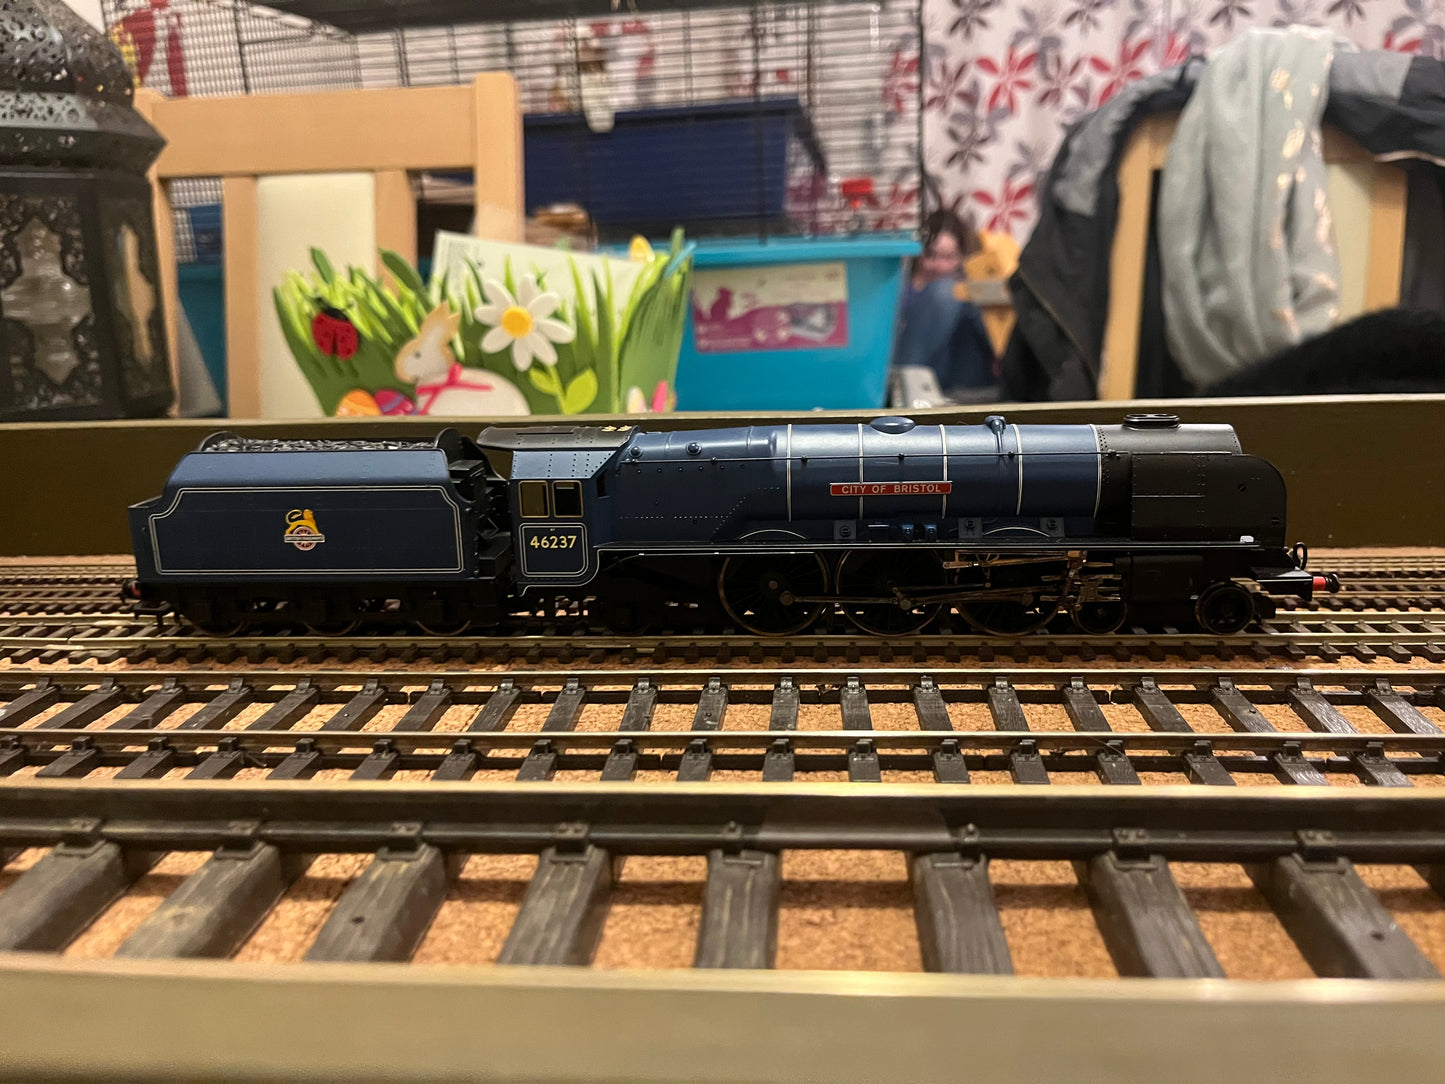 Hornby (OO) Ex LMS 8P ‘Princess Coronation’ No.46237 “City Of Bristol” in British Railways Express Blue (Shed Code 1B Camden Depot) DCC Ready